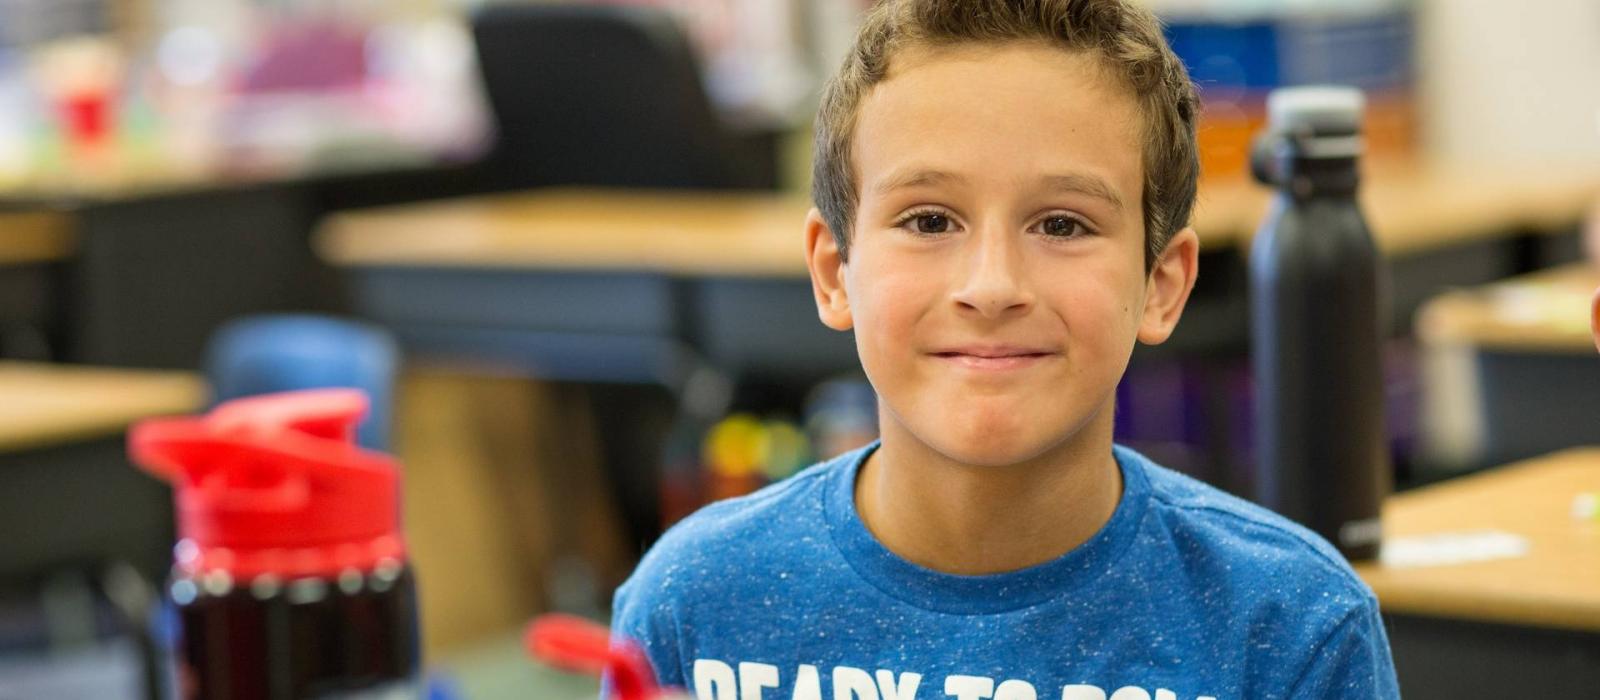 Elementary student smiling in classroom